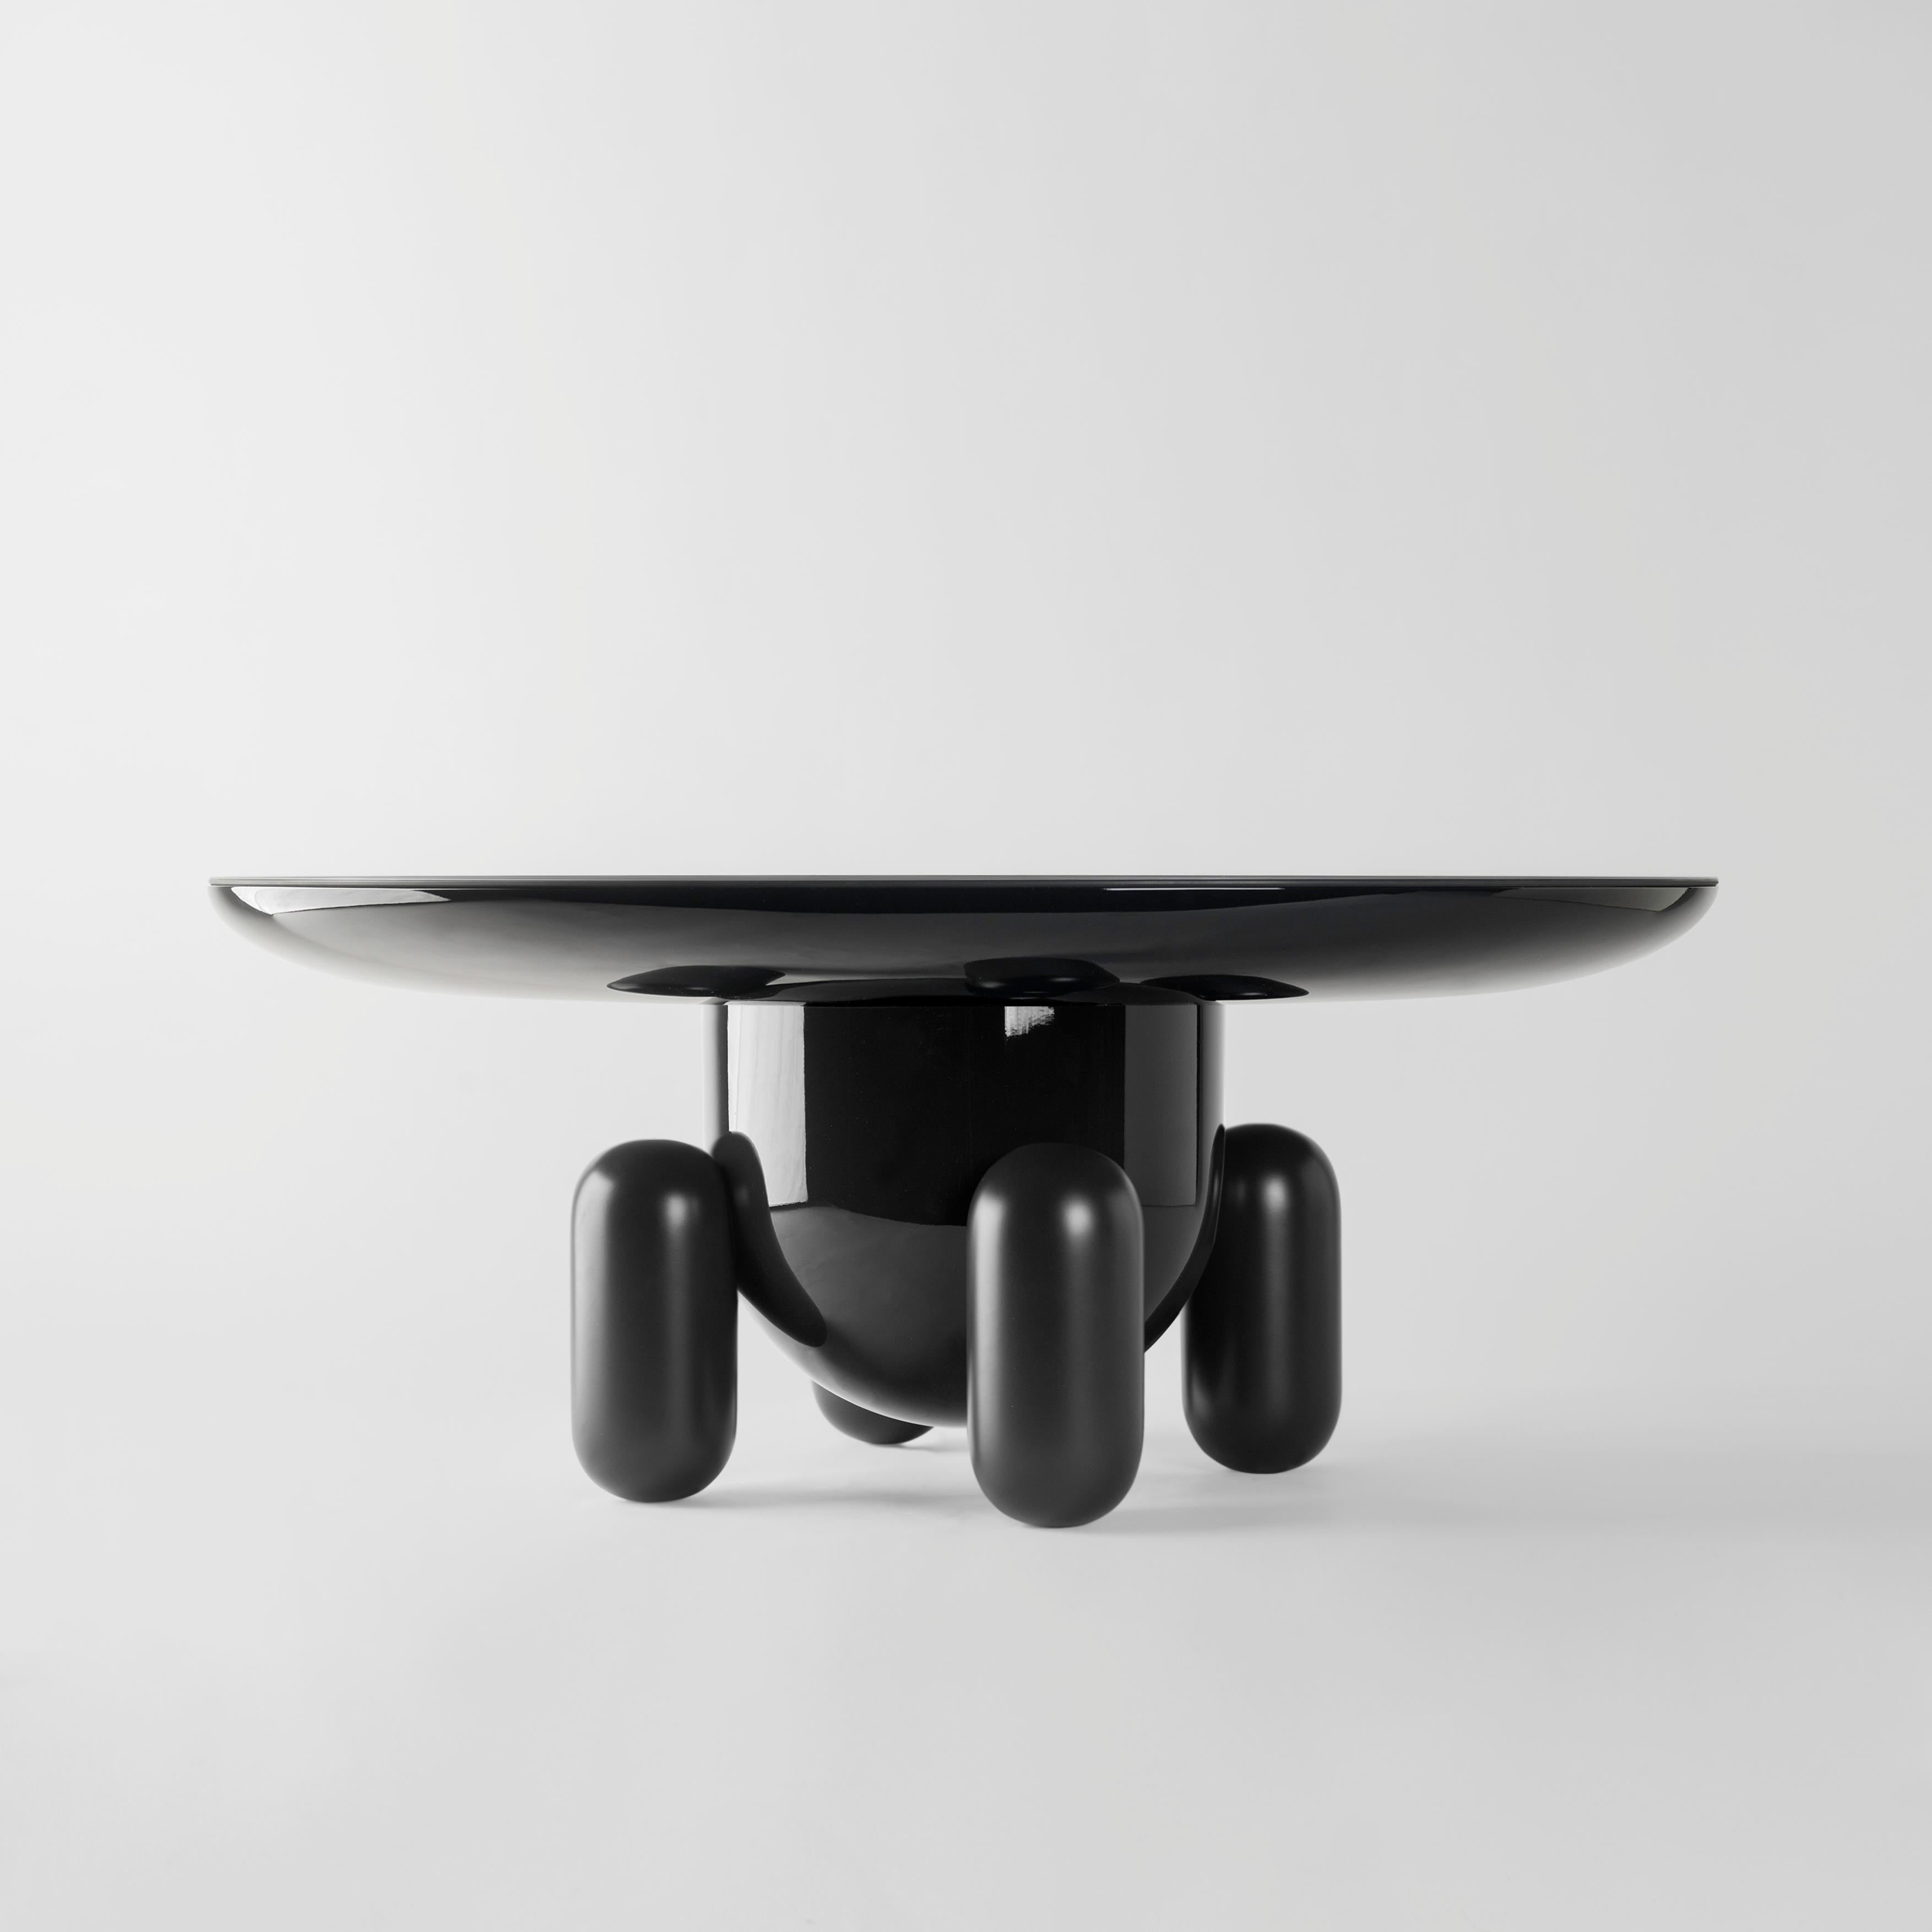 Dark and light grey explorer #03 table

Design by Jaime Hayon, 2019
Manufactured by BD Barcelona.

Lacquered fibreglass body. Solid turned wooden legs and lacquered. Painted glass table top.

Measures: 100 Ø x 42 cm
40 Ø x 50 cm

- Glass: